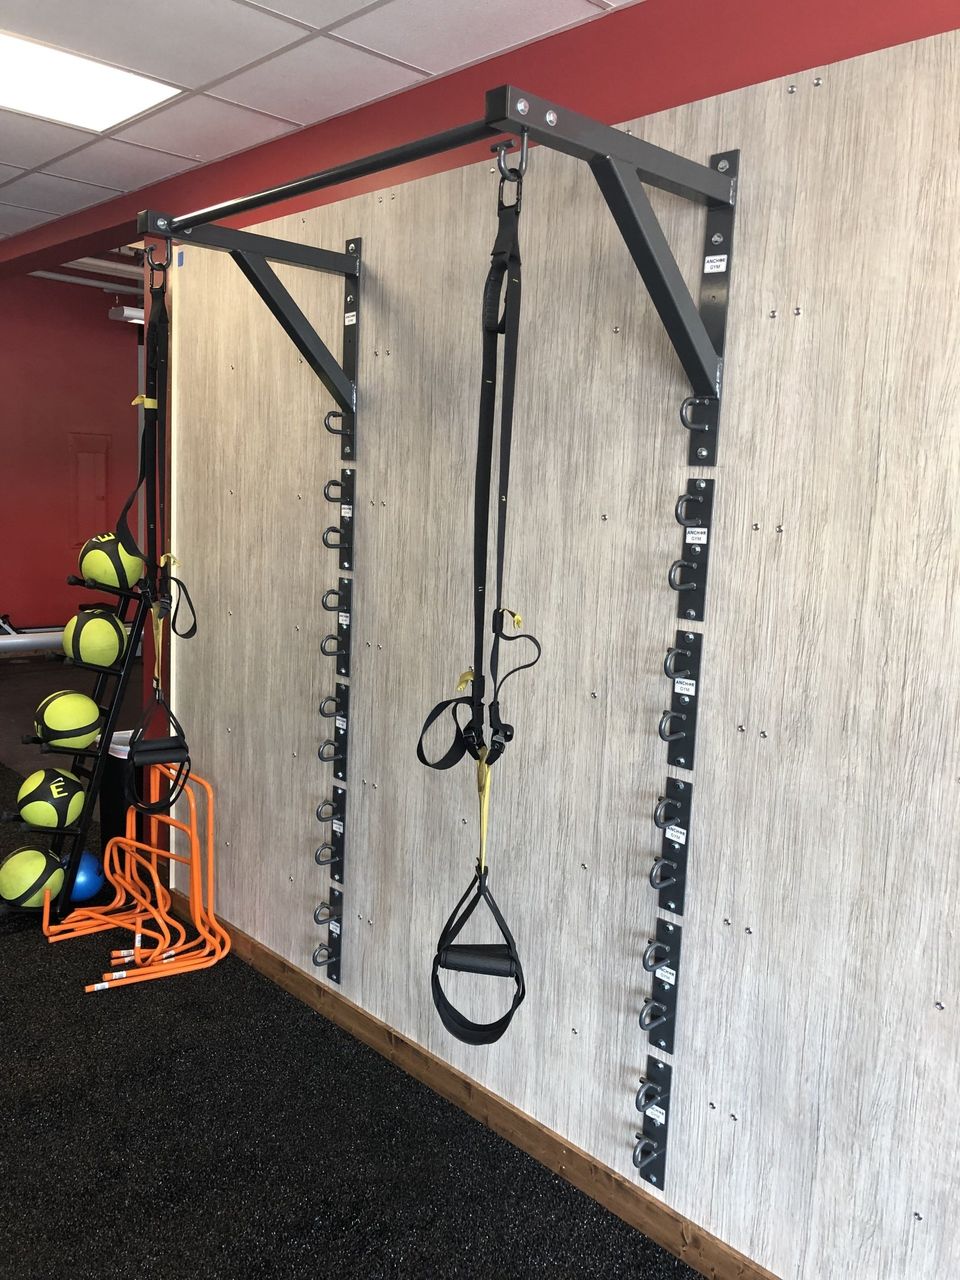 TRX workouts with the anchor gym